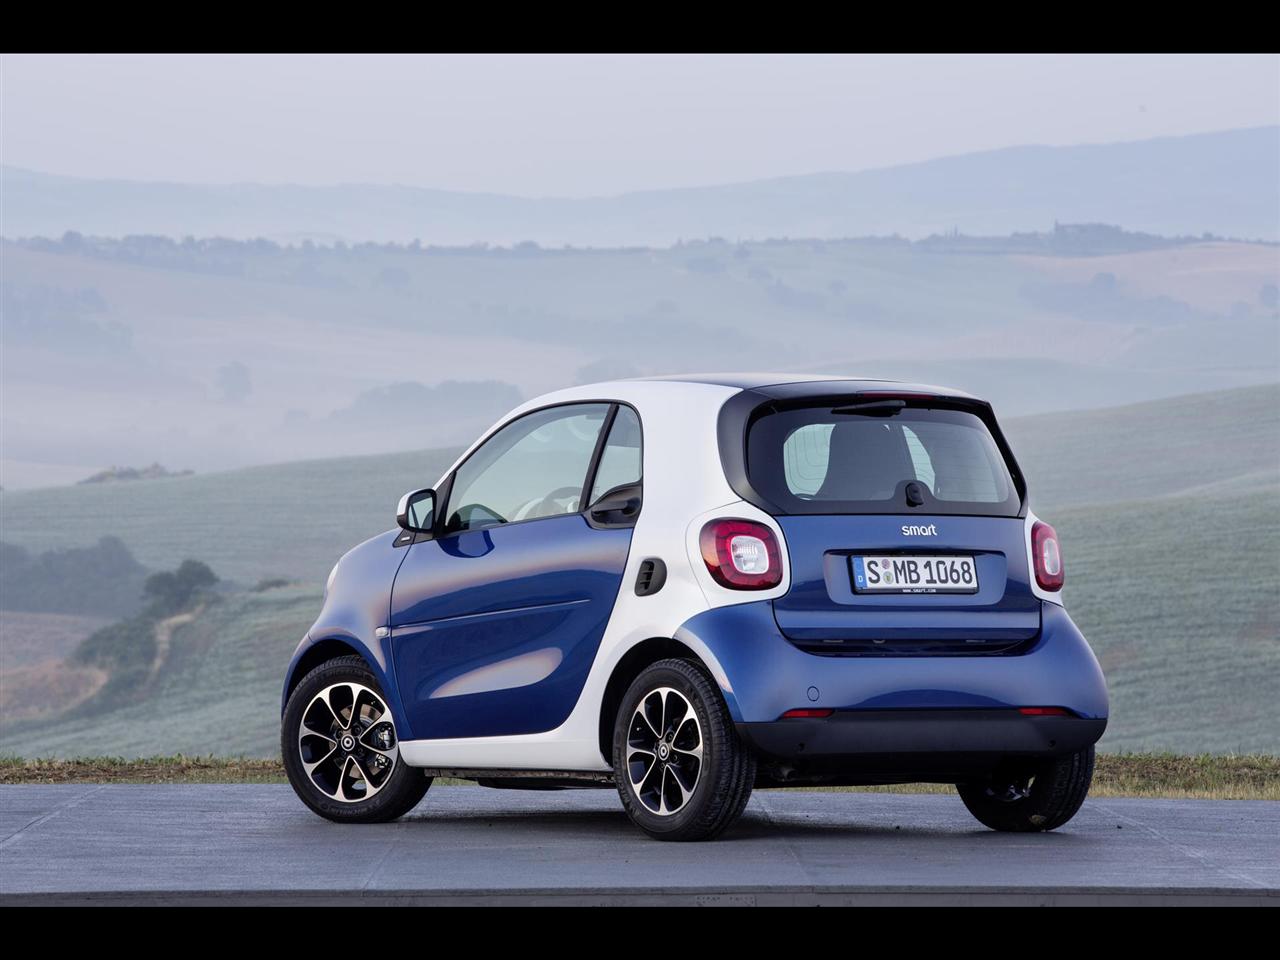 2015 Smart fortwo